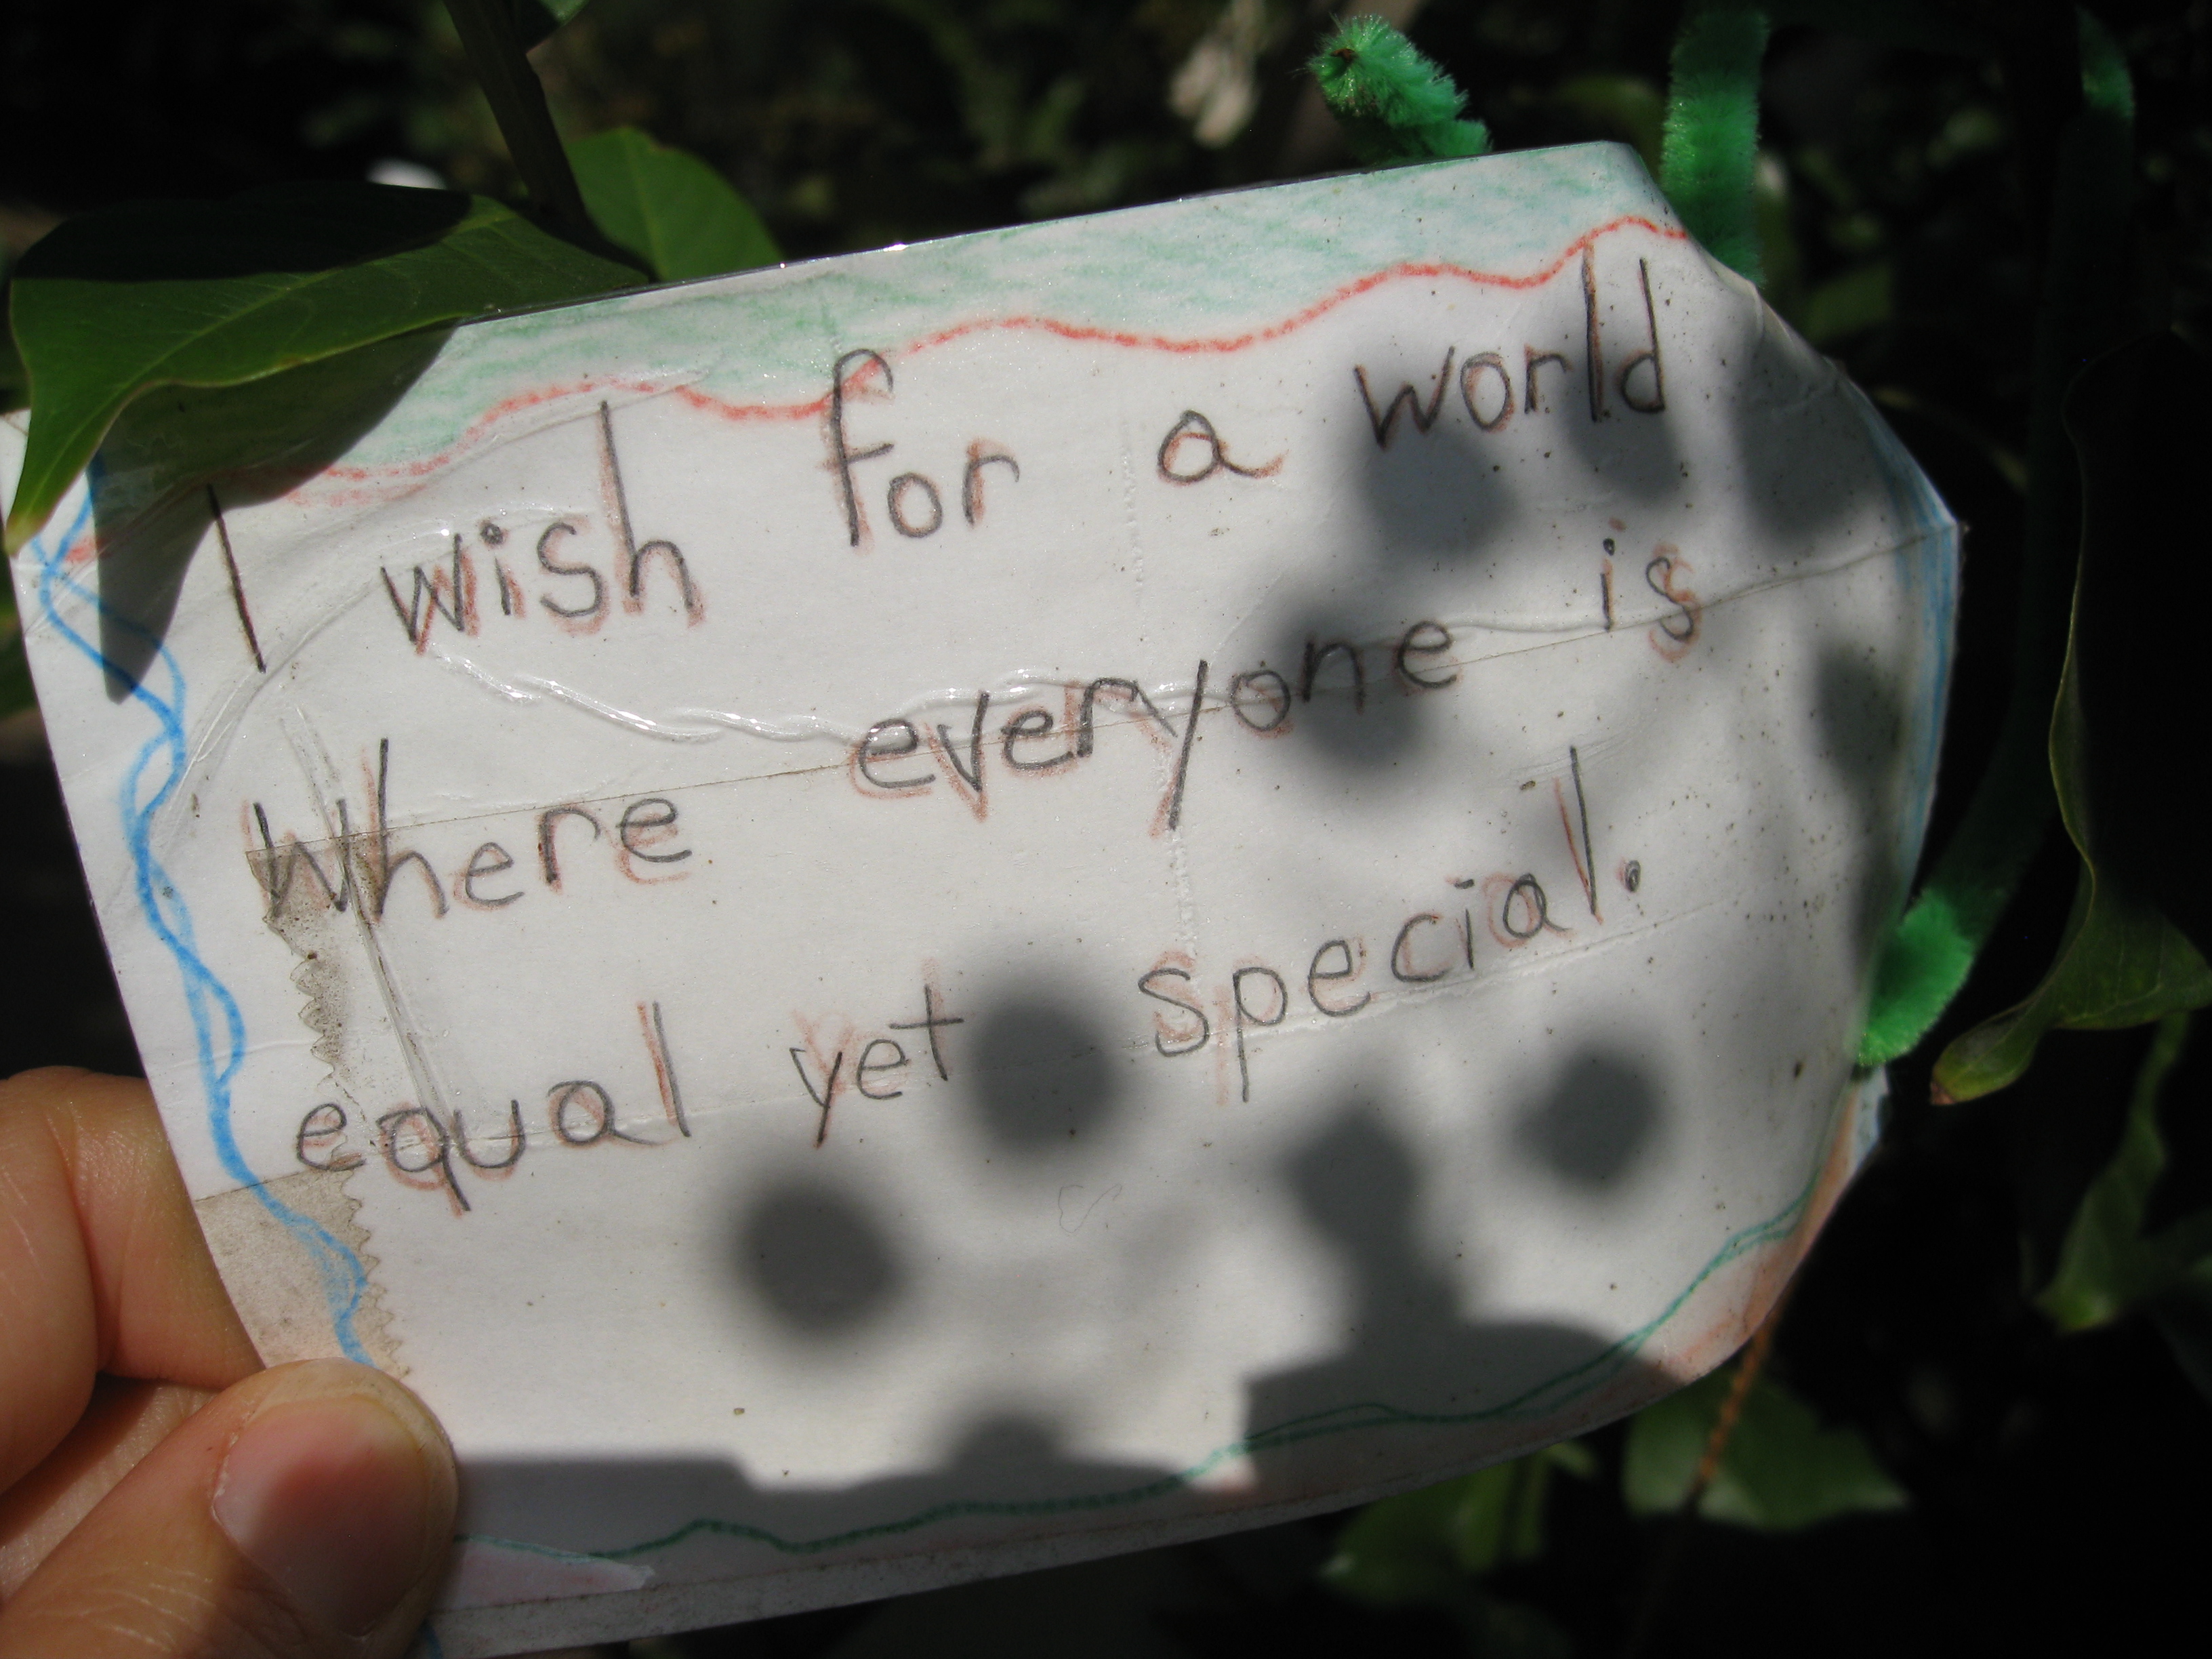 Many wishes were profound and universal. 